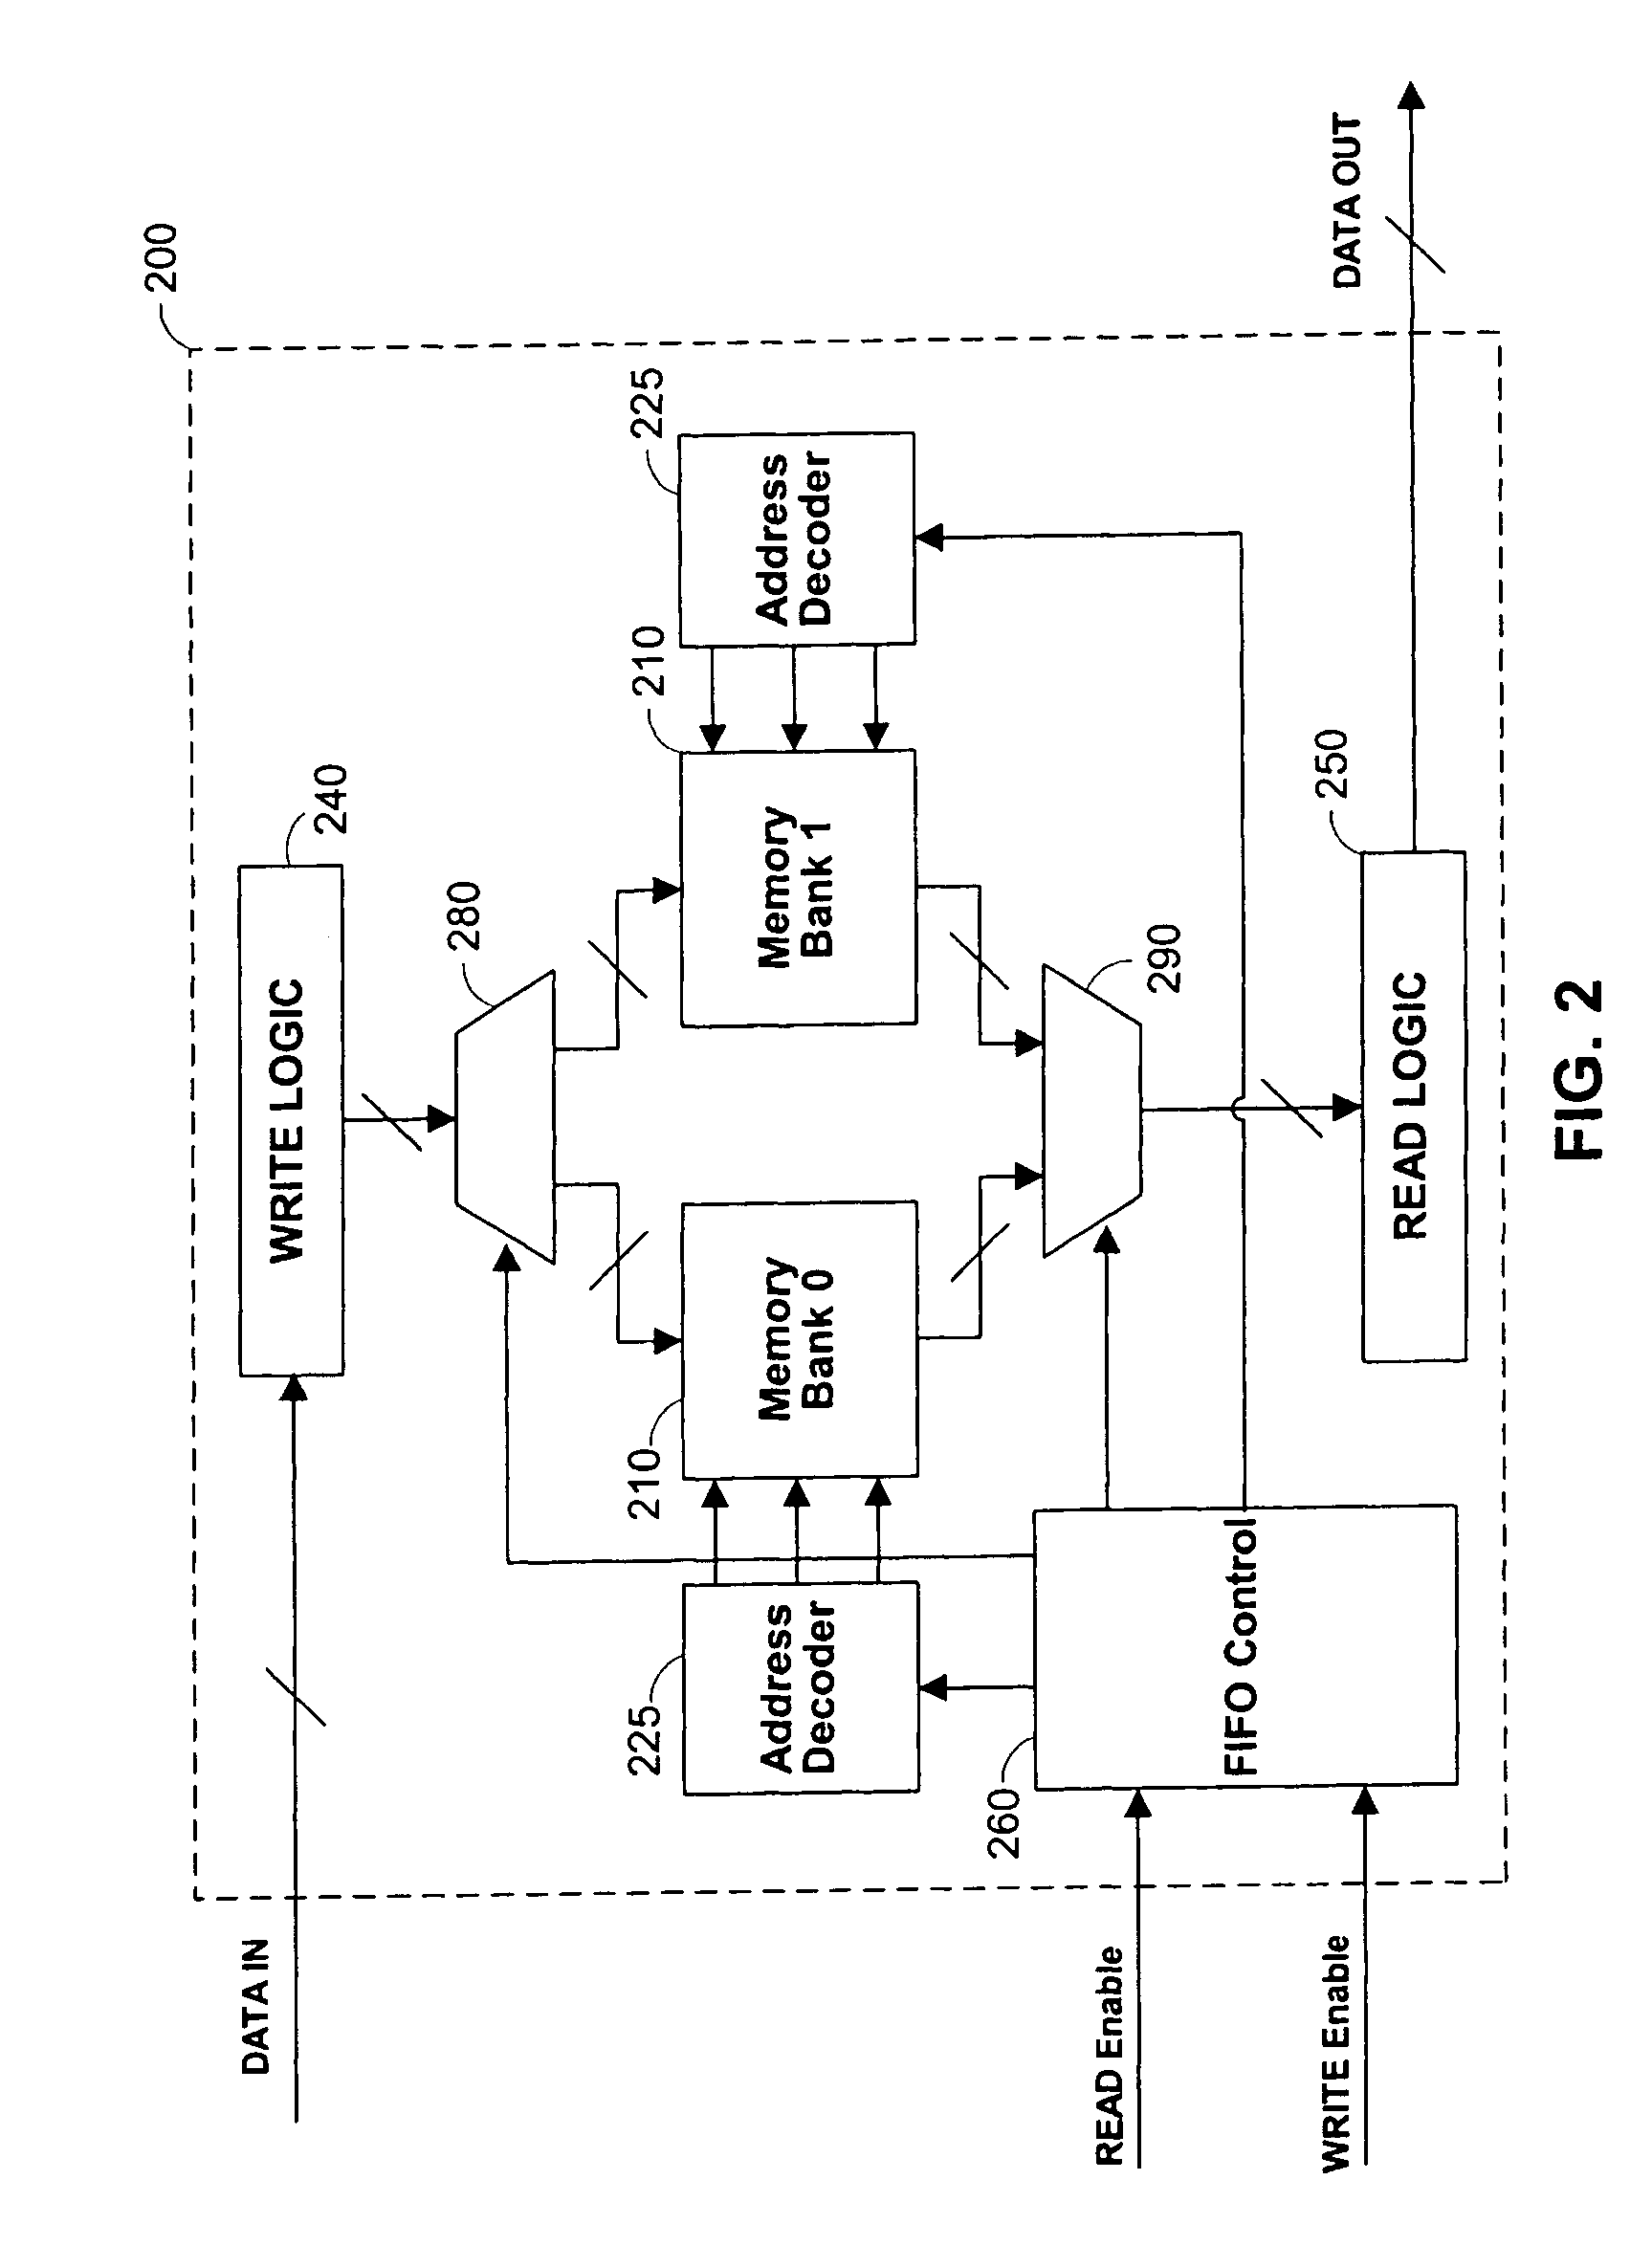 Circuitry and methods for efficient FIFO memory